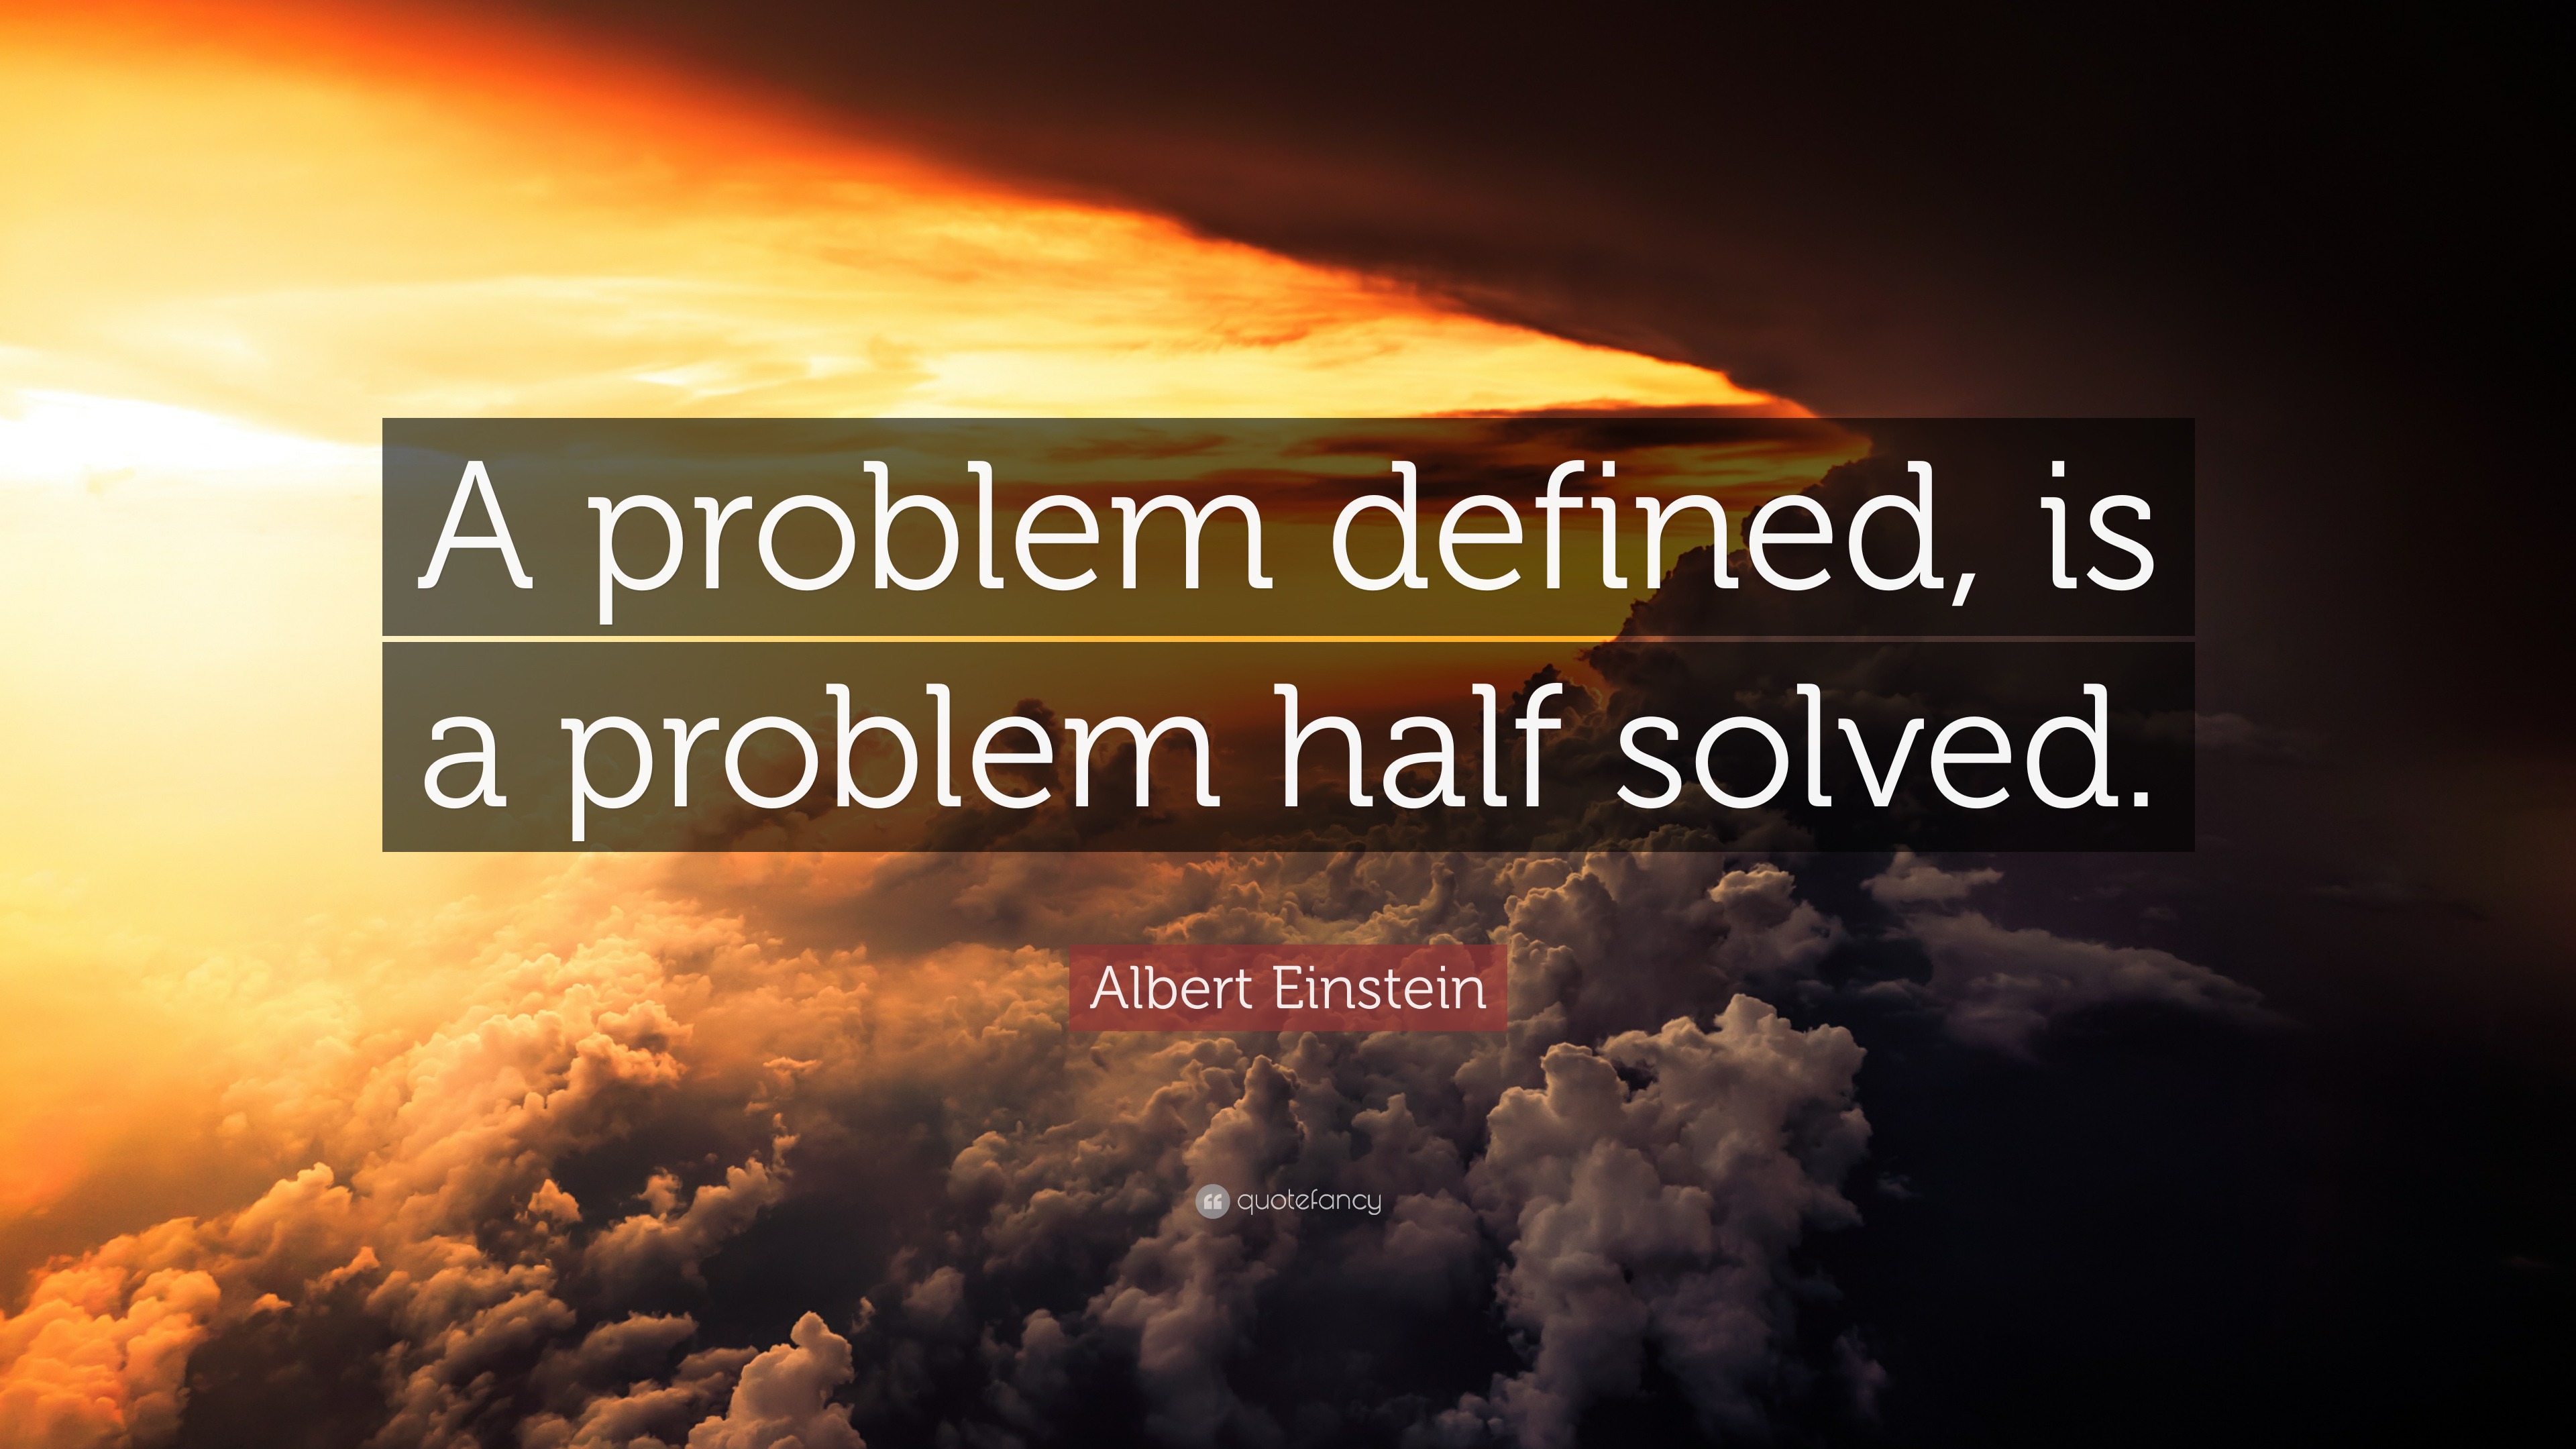 rational thinking when problem solving is defined as the ability to